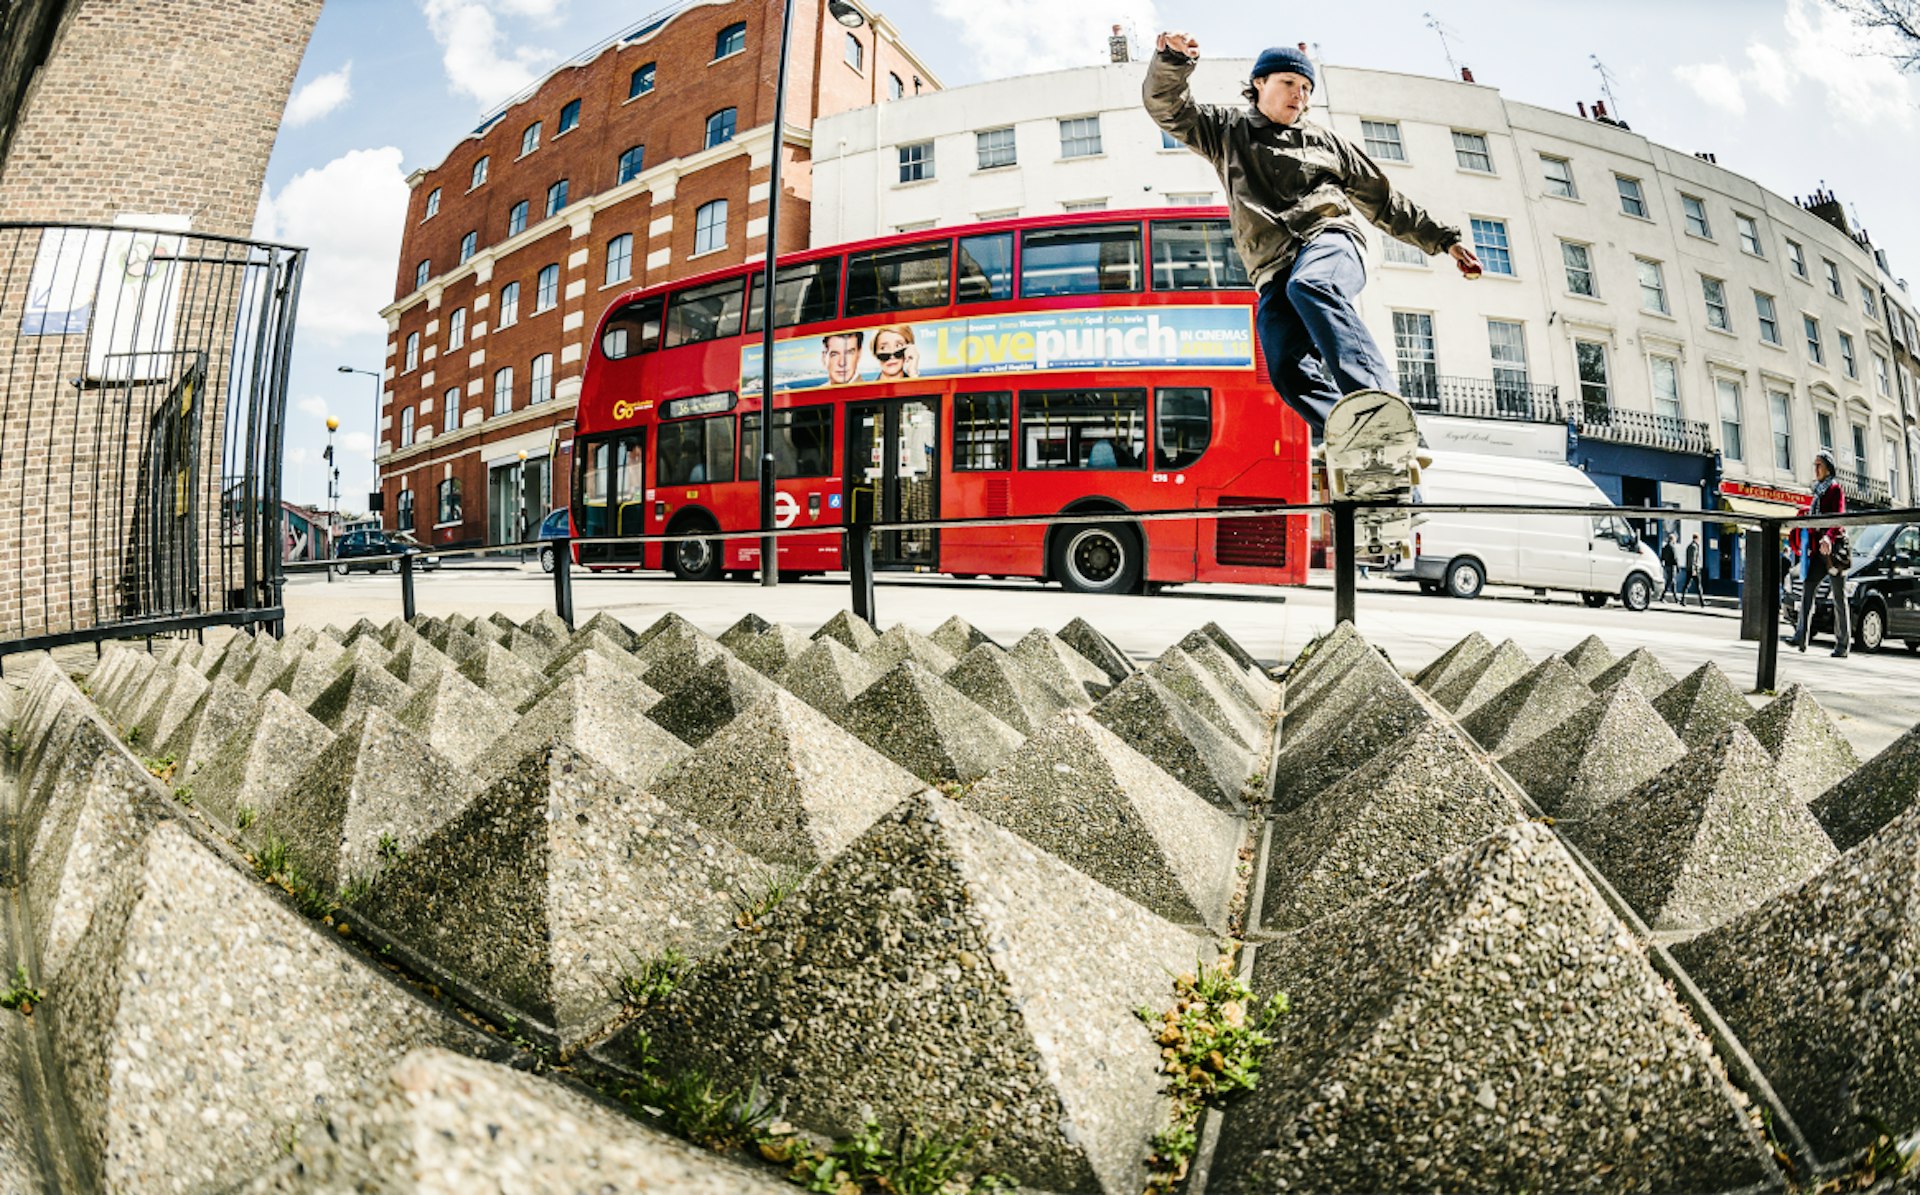 This is what a year of skateboarding in London looks like